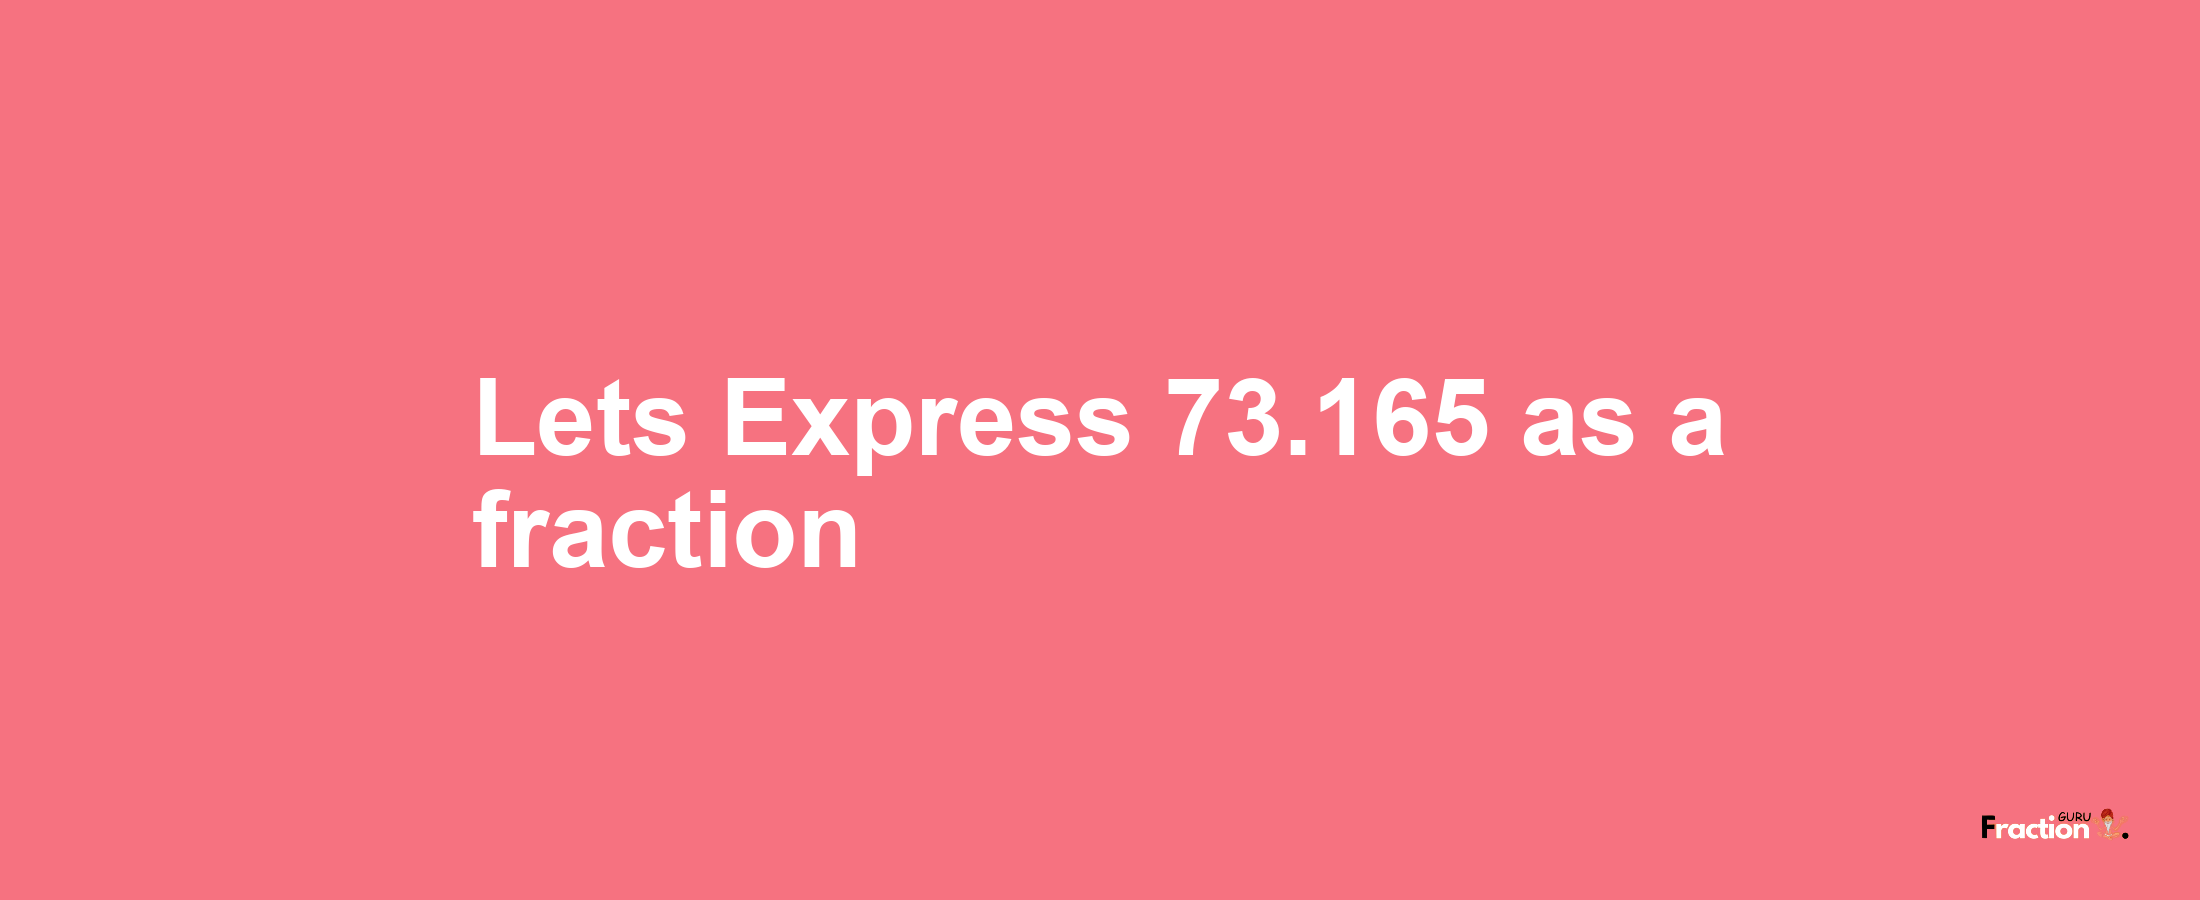 Lets Express 73.165 as afraction